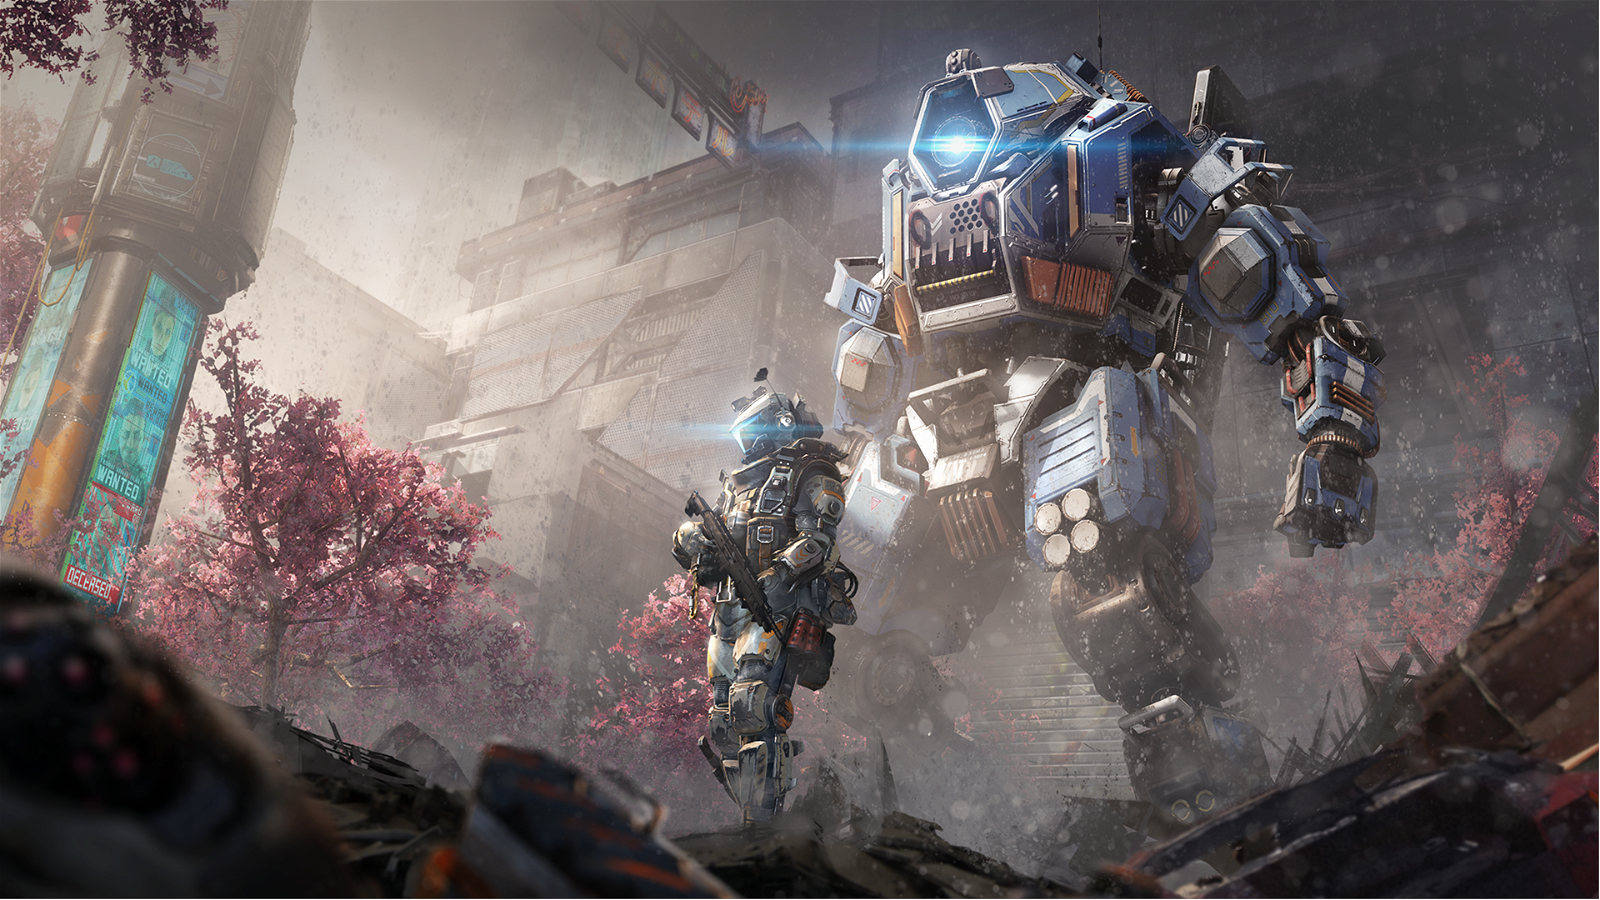 Titanfall 2 fans speculate about the hints in the latest update, hoping for a new game or expansion.